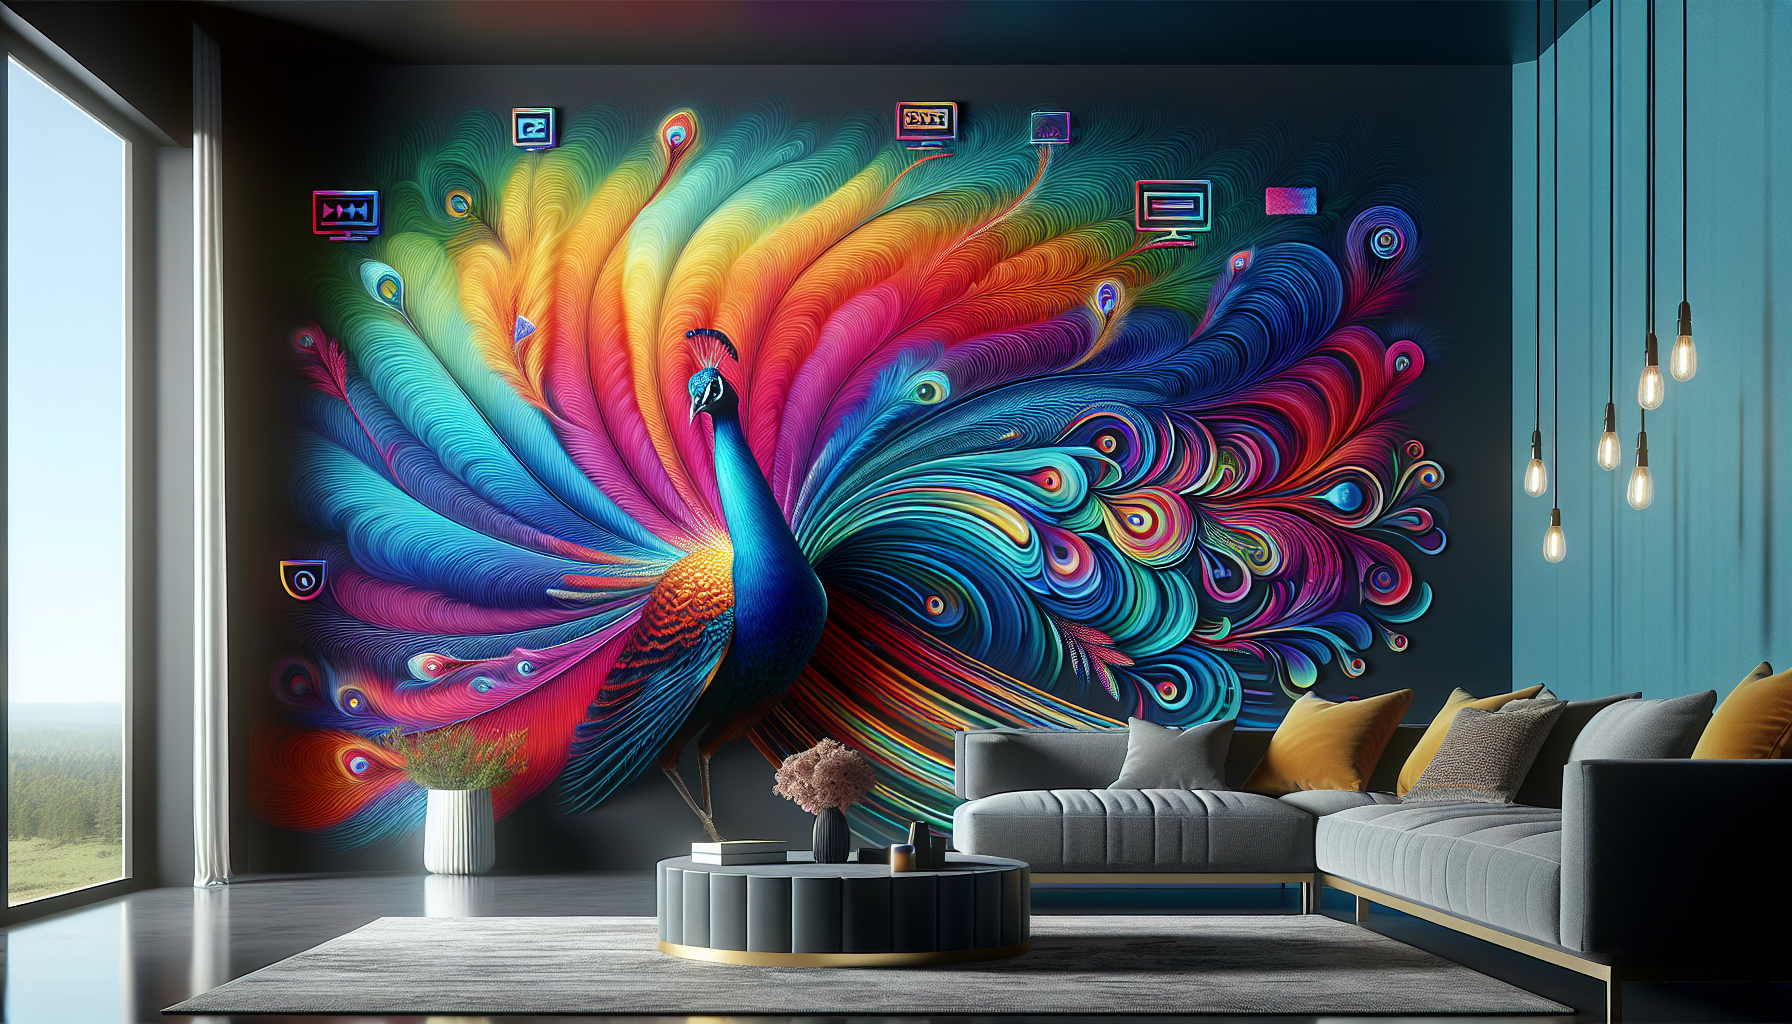 Digital artwork of a vibrant peacock whose feathers transition into various streaming interface screens, including Netflix, Peacock, and Apple TV, symbolizing the integration of these services, set ag